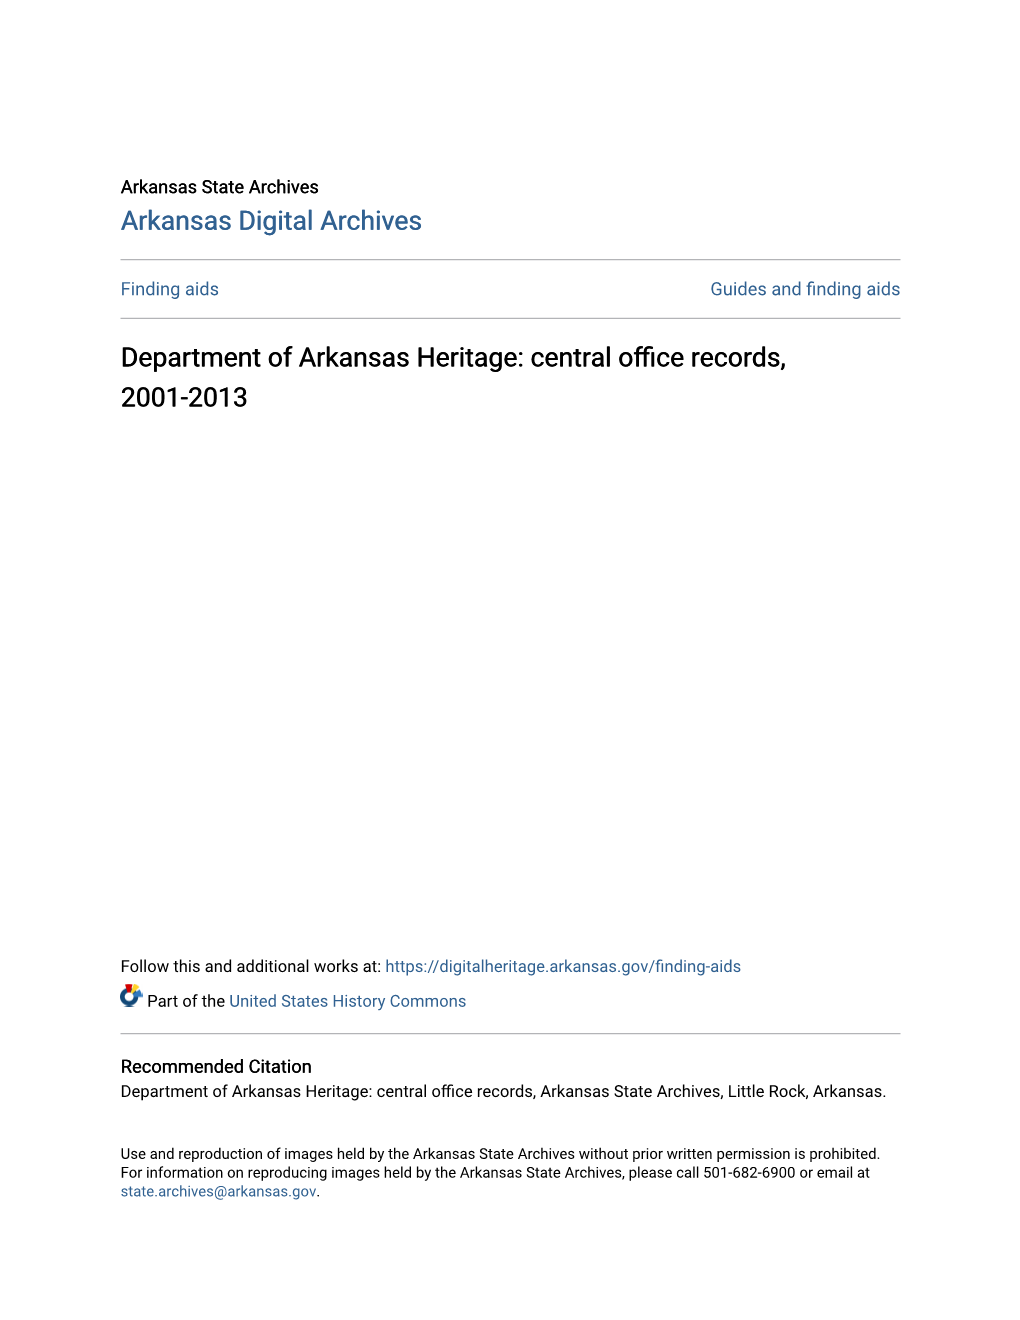 Department of Arkansas Heritage: Central Office Records, 2001-2013